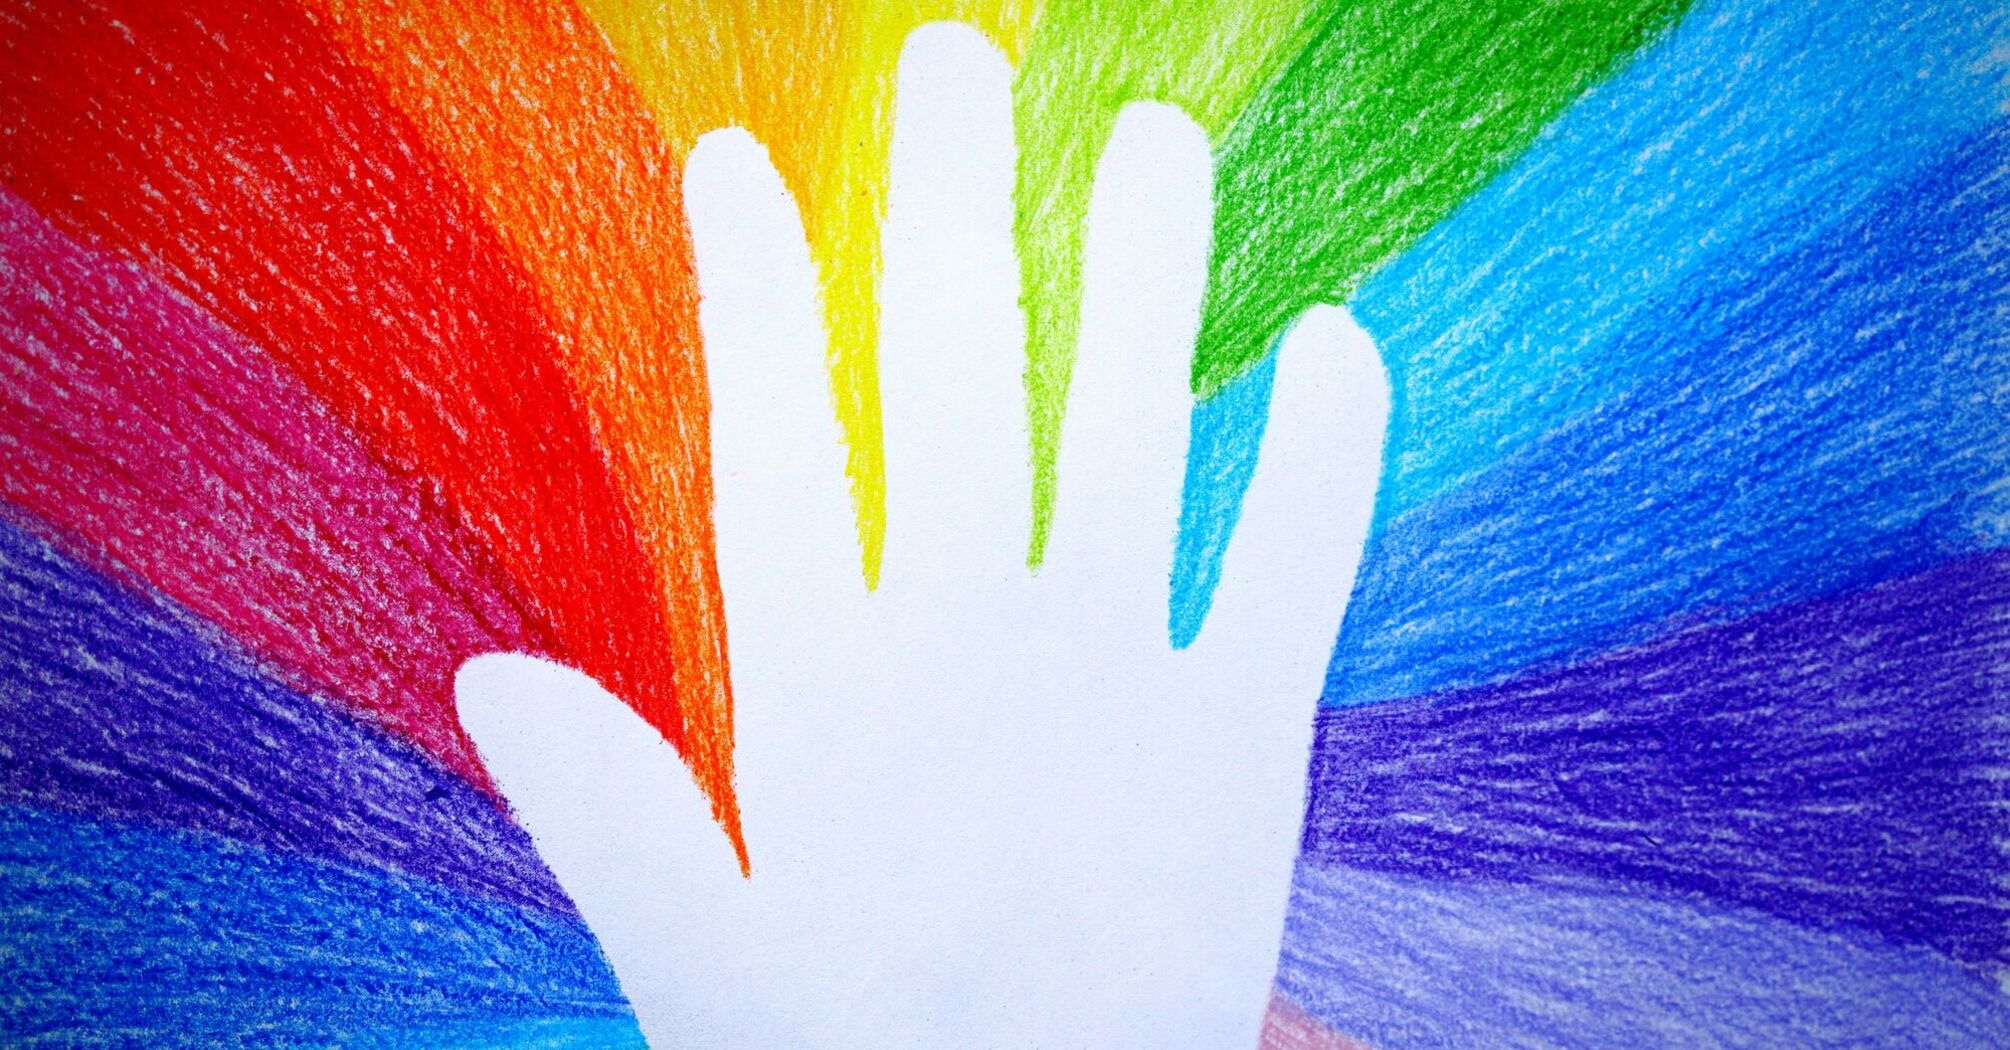 A white handprint centered on a background with radiating rainbow-colored crayon streaks